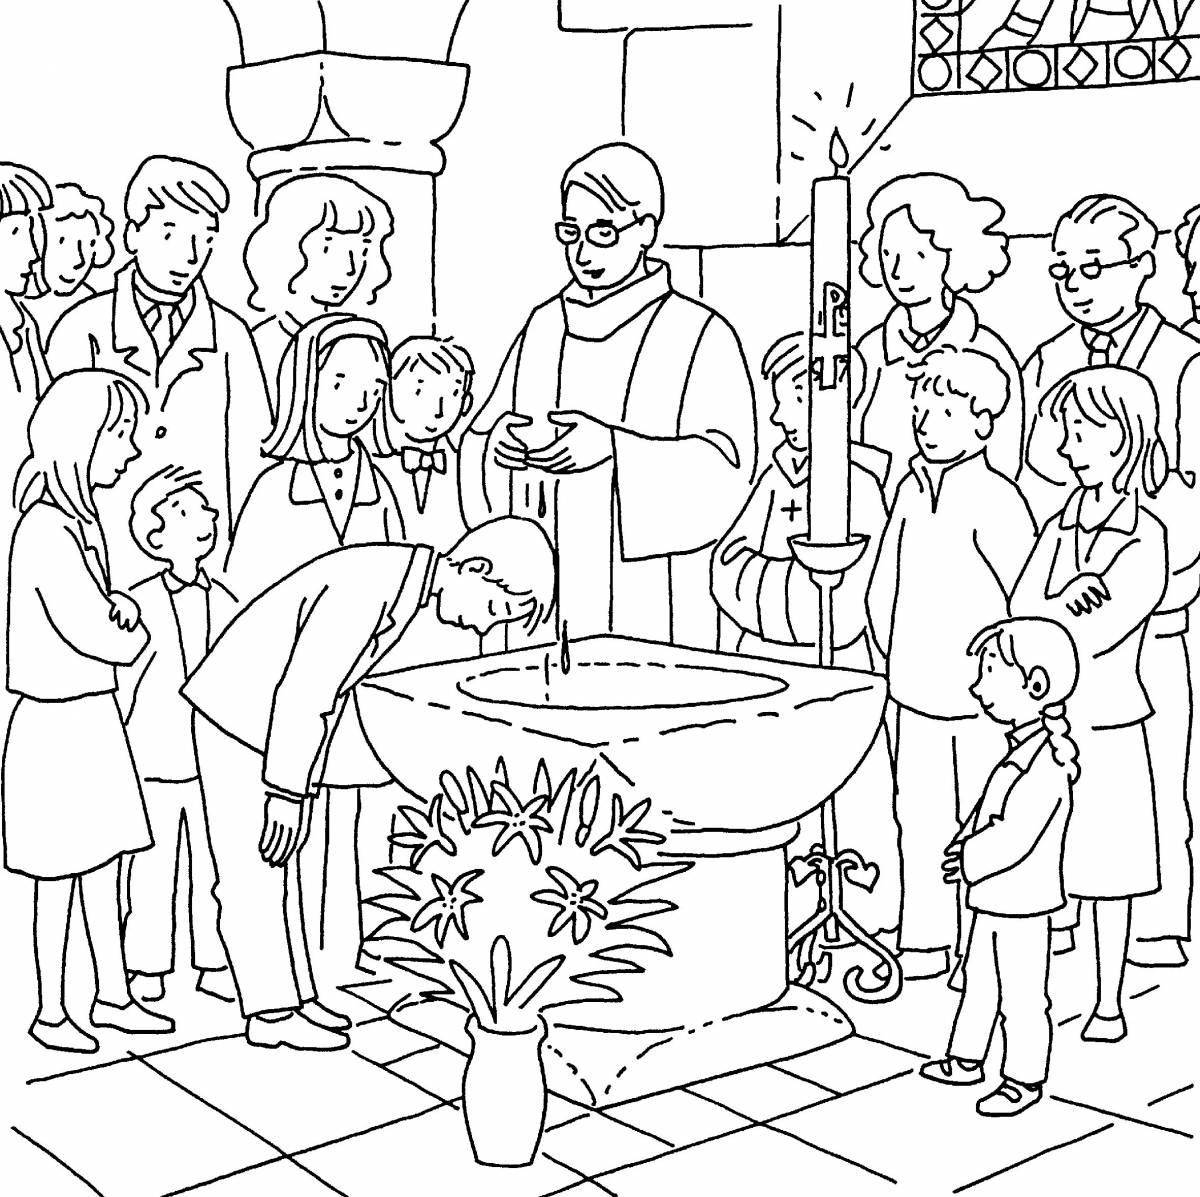 Uplifting coloring of the sacrament of baptism